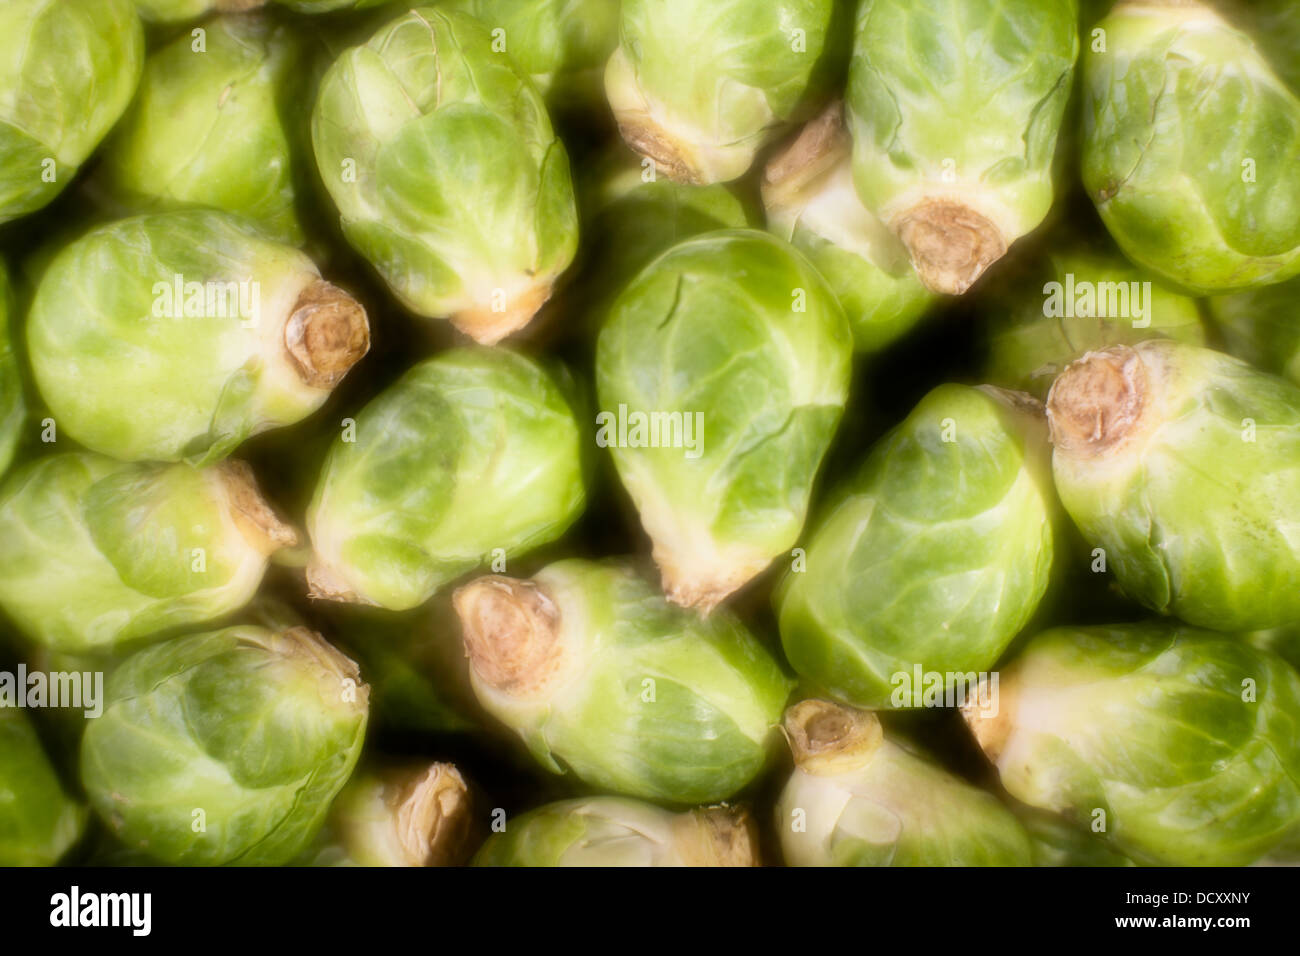 brussels sprouts many closeup background soft focus Stock Photo